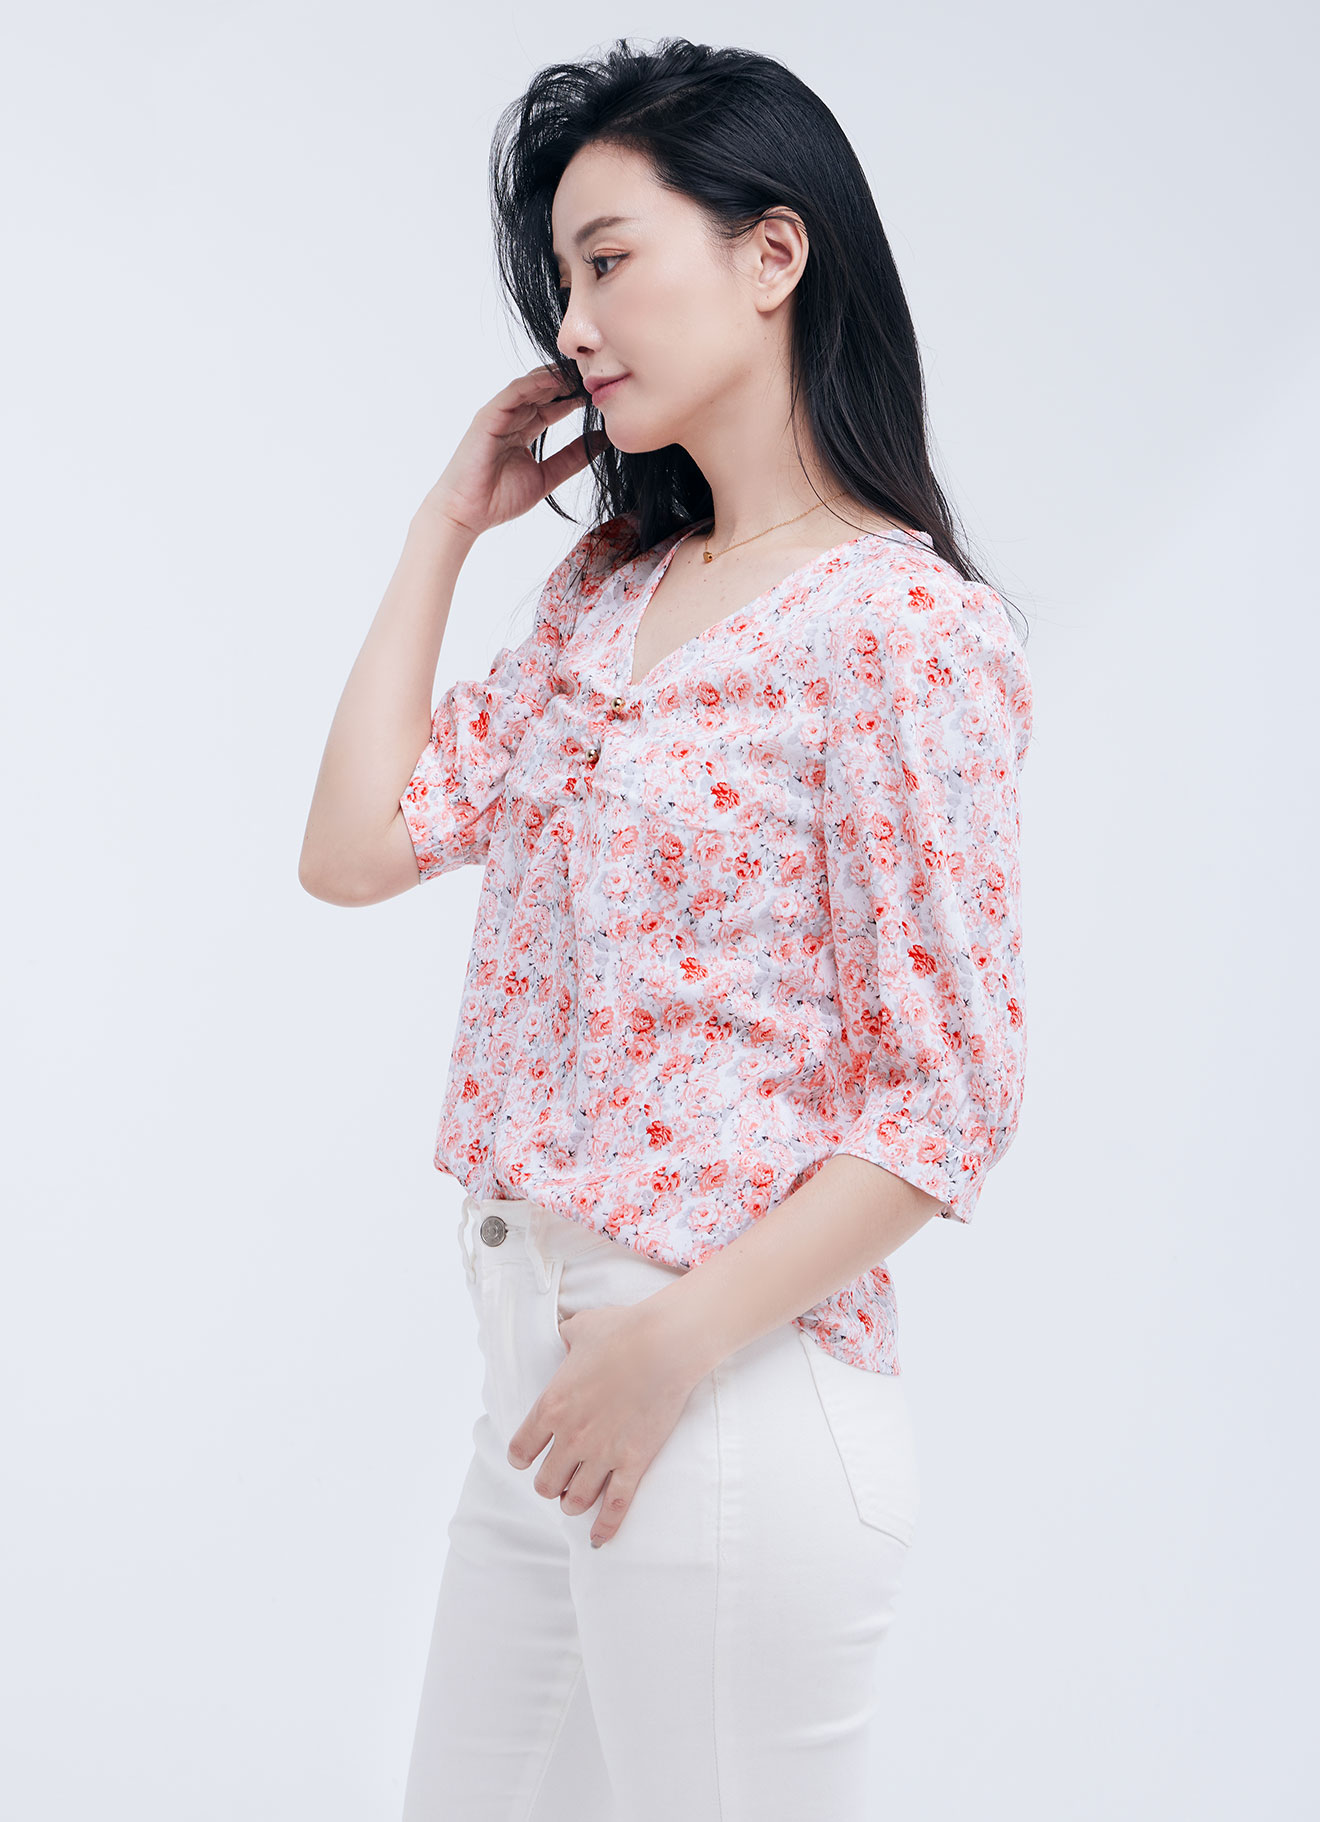 Conch-Shell  by Floral Printed Blouse